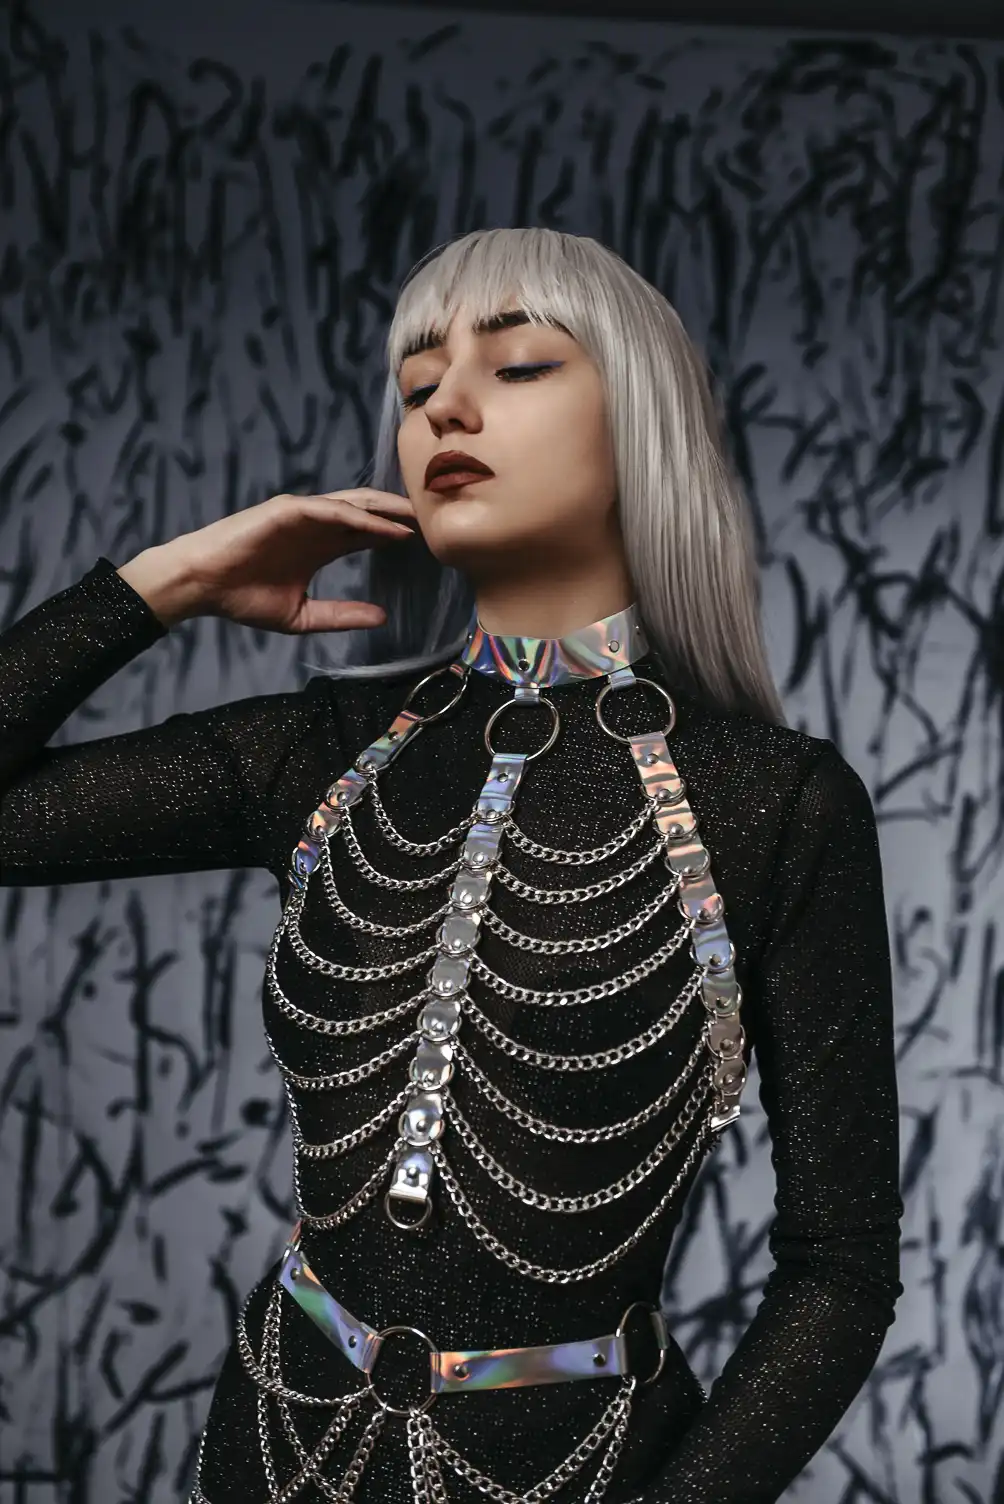 Extravagant Astral body harness accessory in natural holographic leather with chains and chains.